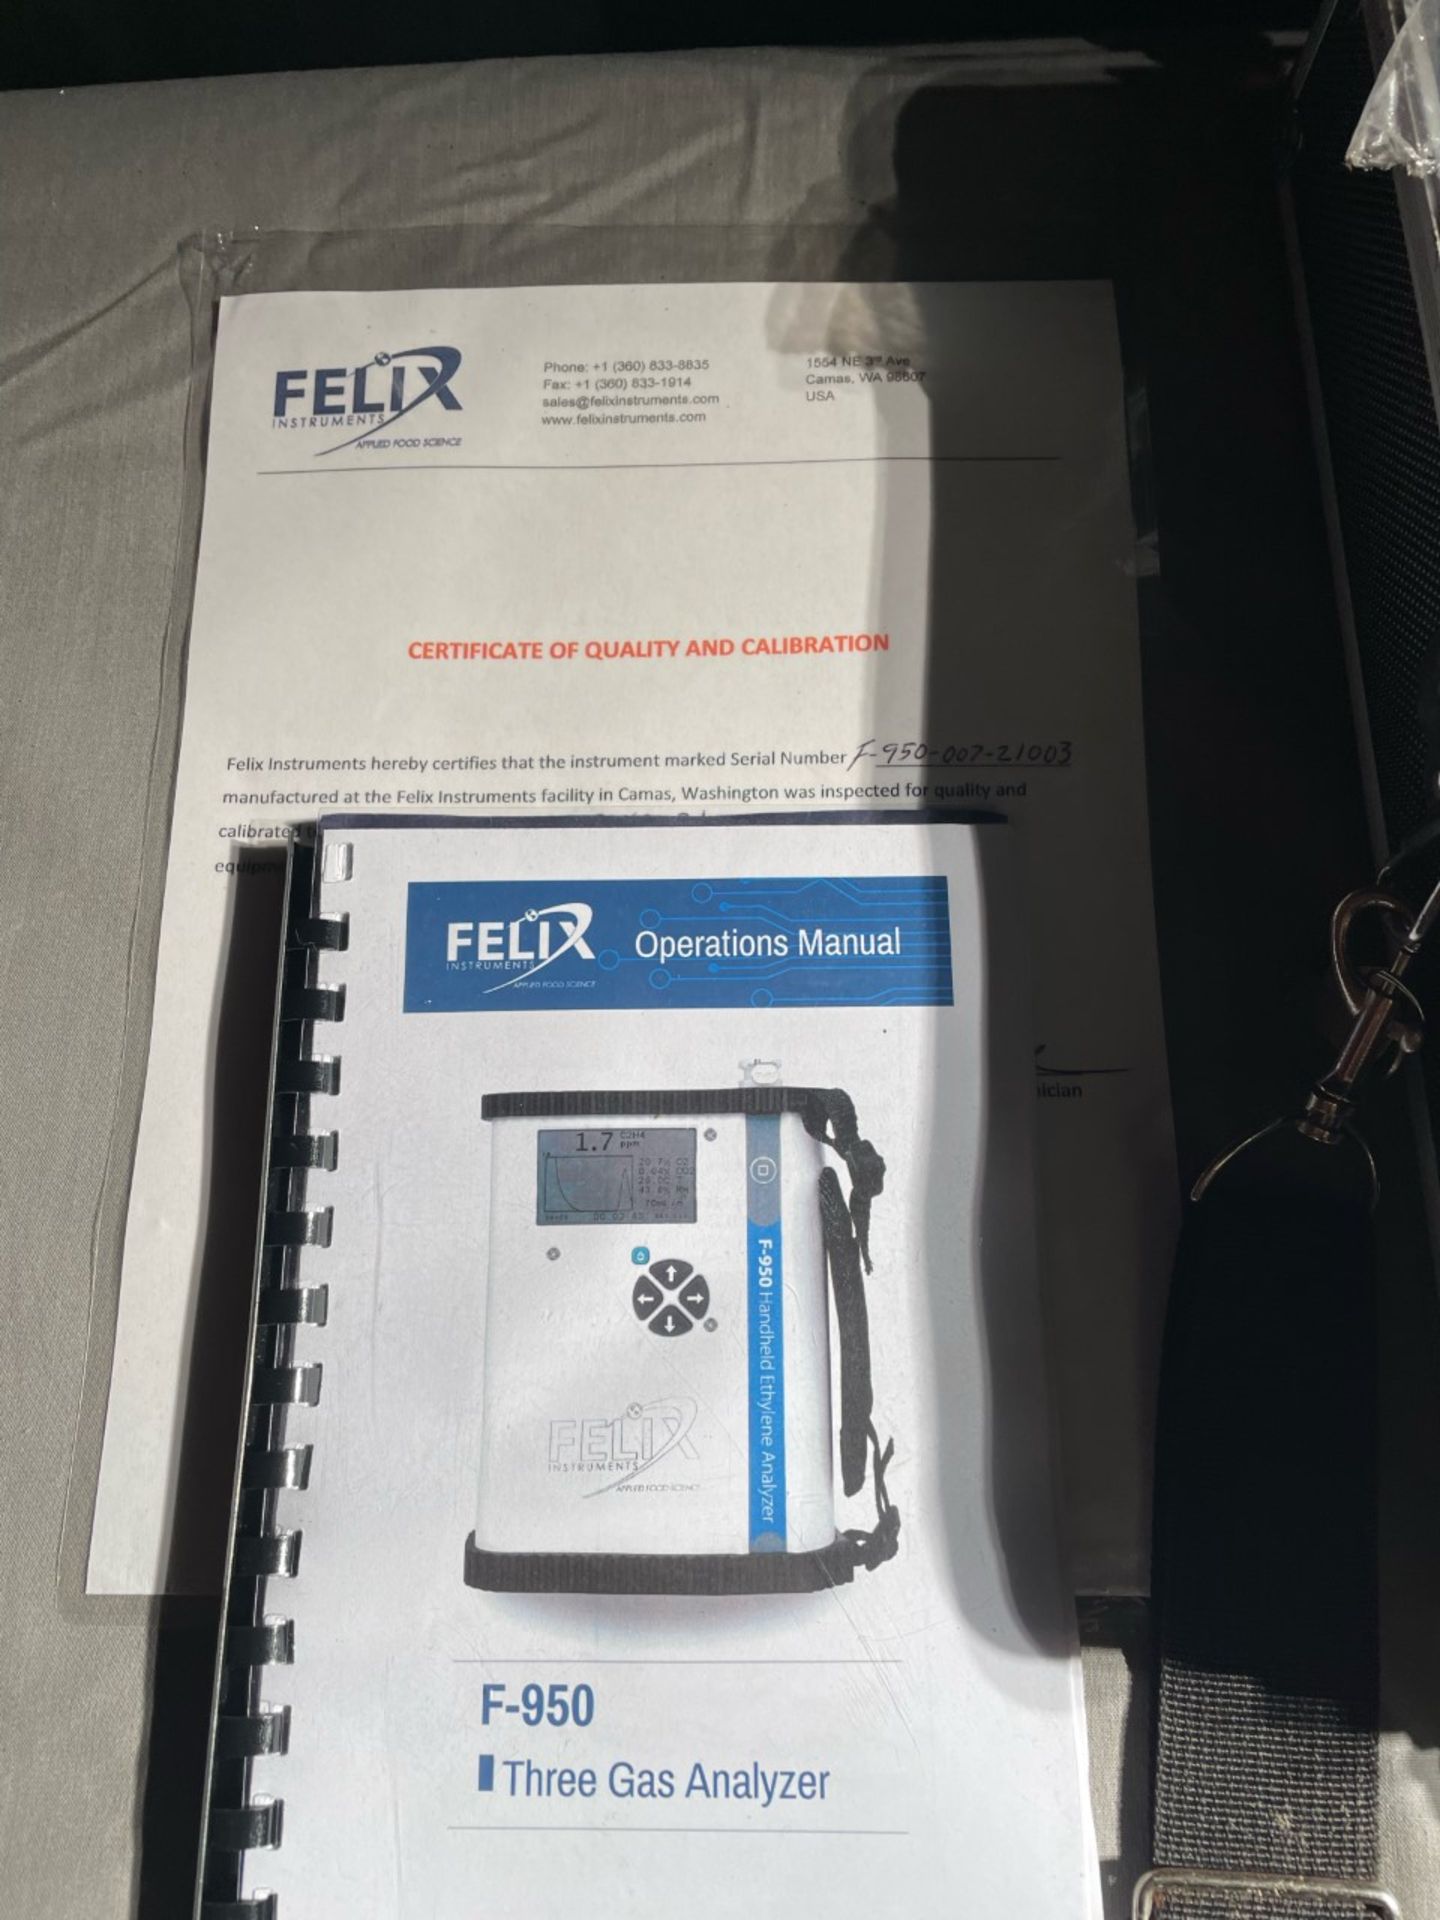 1x Felix F-950 three gas analyzer. Everything in box looks new and in original packaging - Image 3 of 4